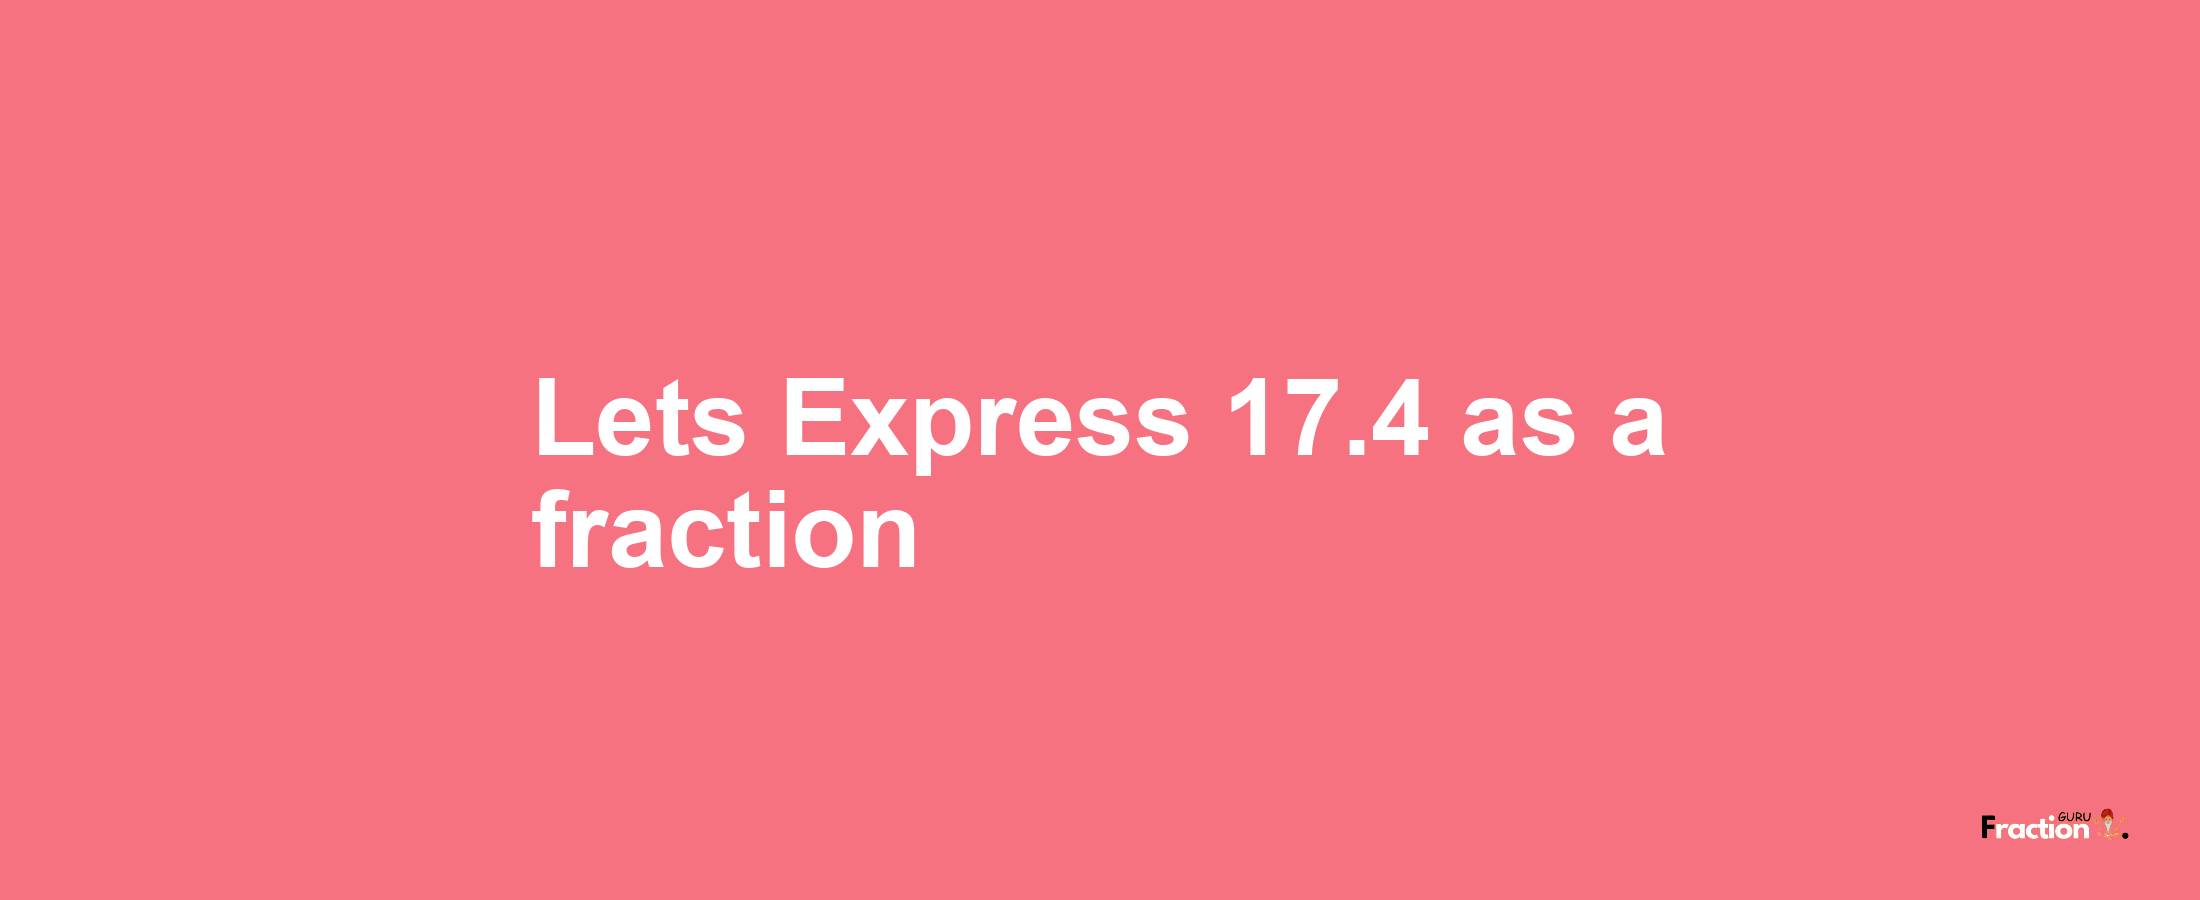 Lets Express 17.4 as afraction